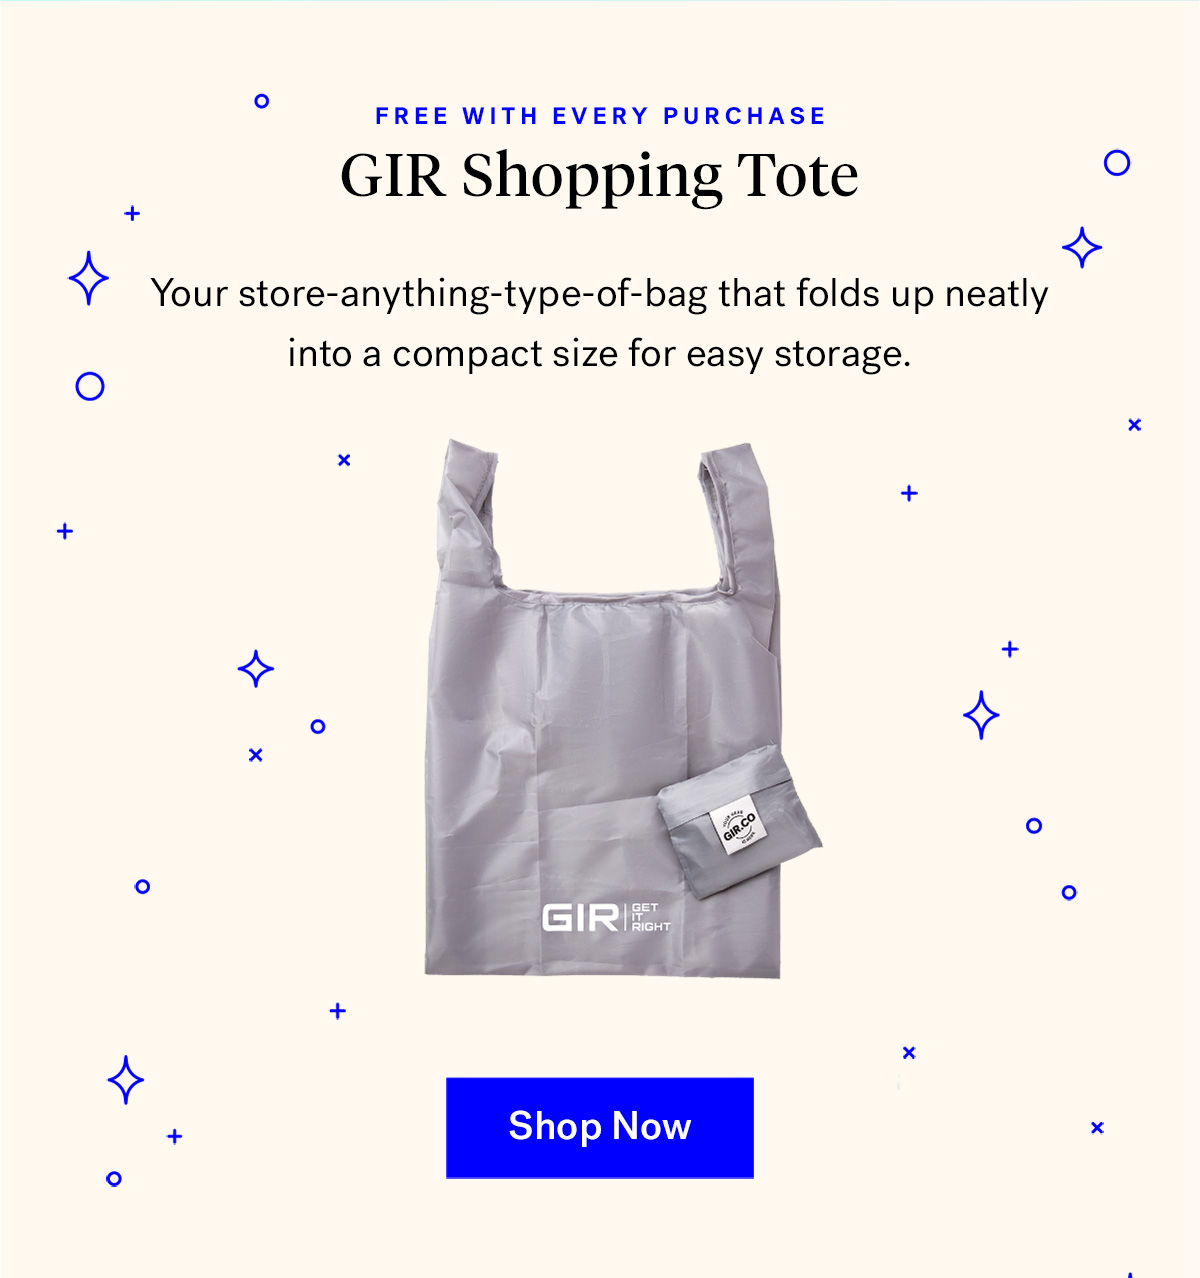  
                               
                                GIR Reusable Shopping Tote (badge for free with every purchase)
                                Your store-anything-type-of-bag that folds up neatly
                                into a compact size for easy storage.

                                Shop Now

                                